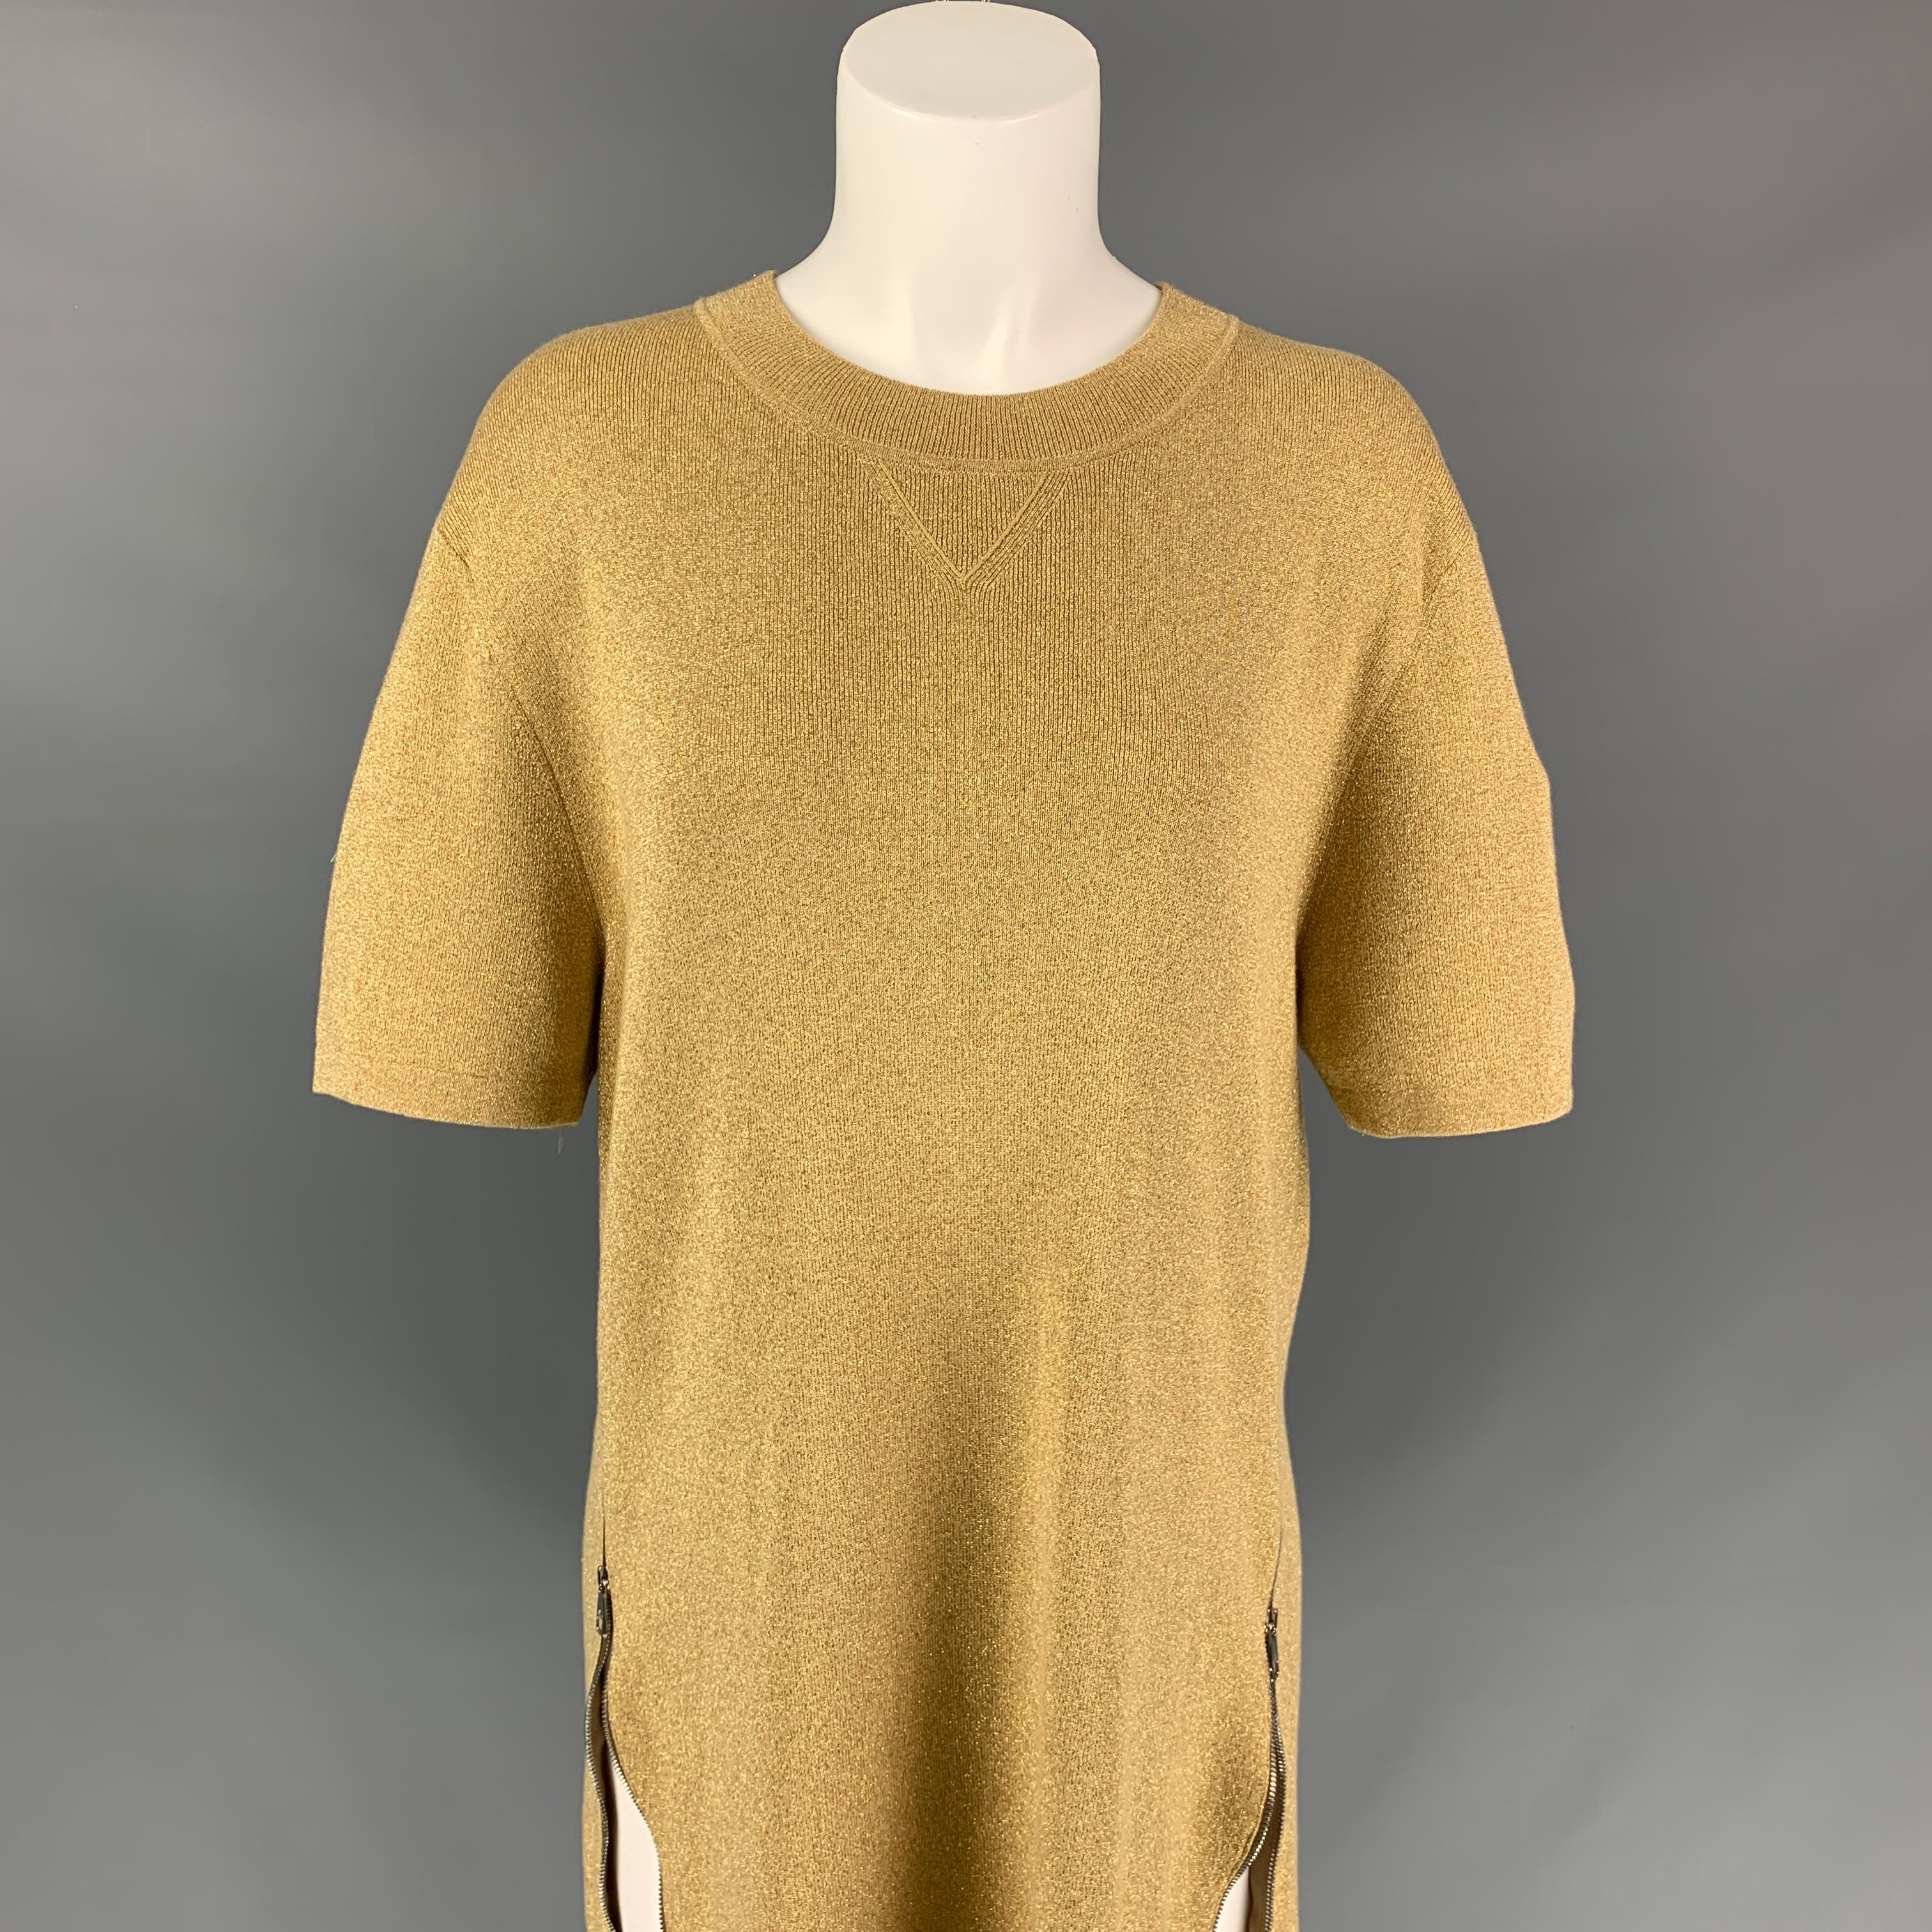 NEIL BARRETT pullover comes in a gold metallic polyester blend featuring a straight fit, side zippers, short sleeves, and a crew-neck. 

Very Good Pre-Owned Condition.
Marked: M

Measurements:

Shoulder: 19.5 in.
Bust: 38 in.
Sleeve: 10 in.
Length: